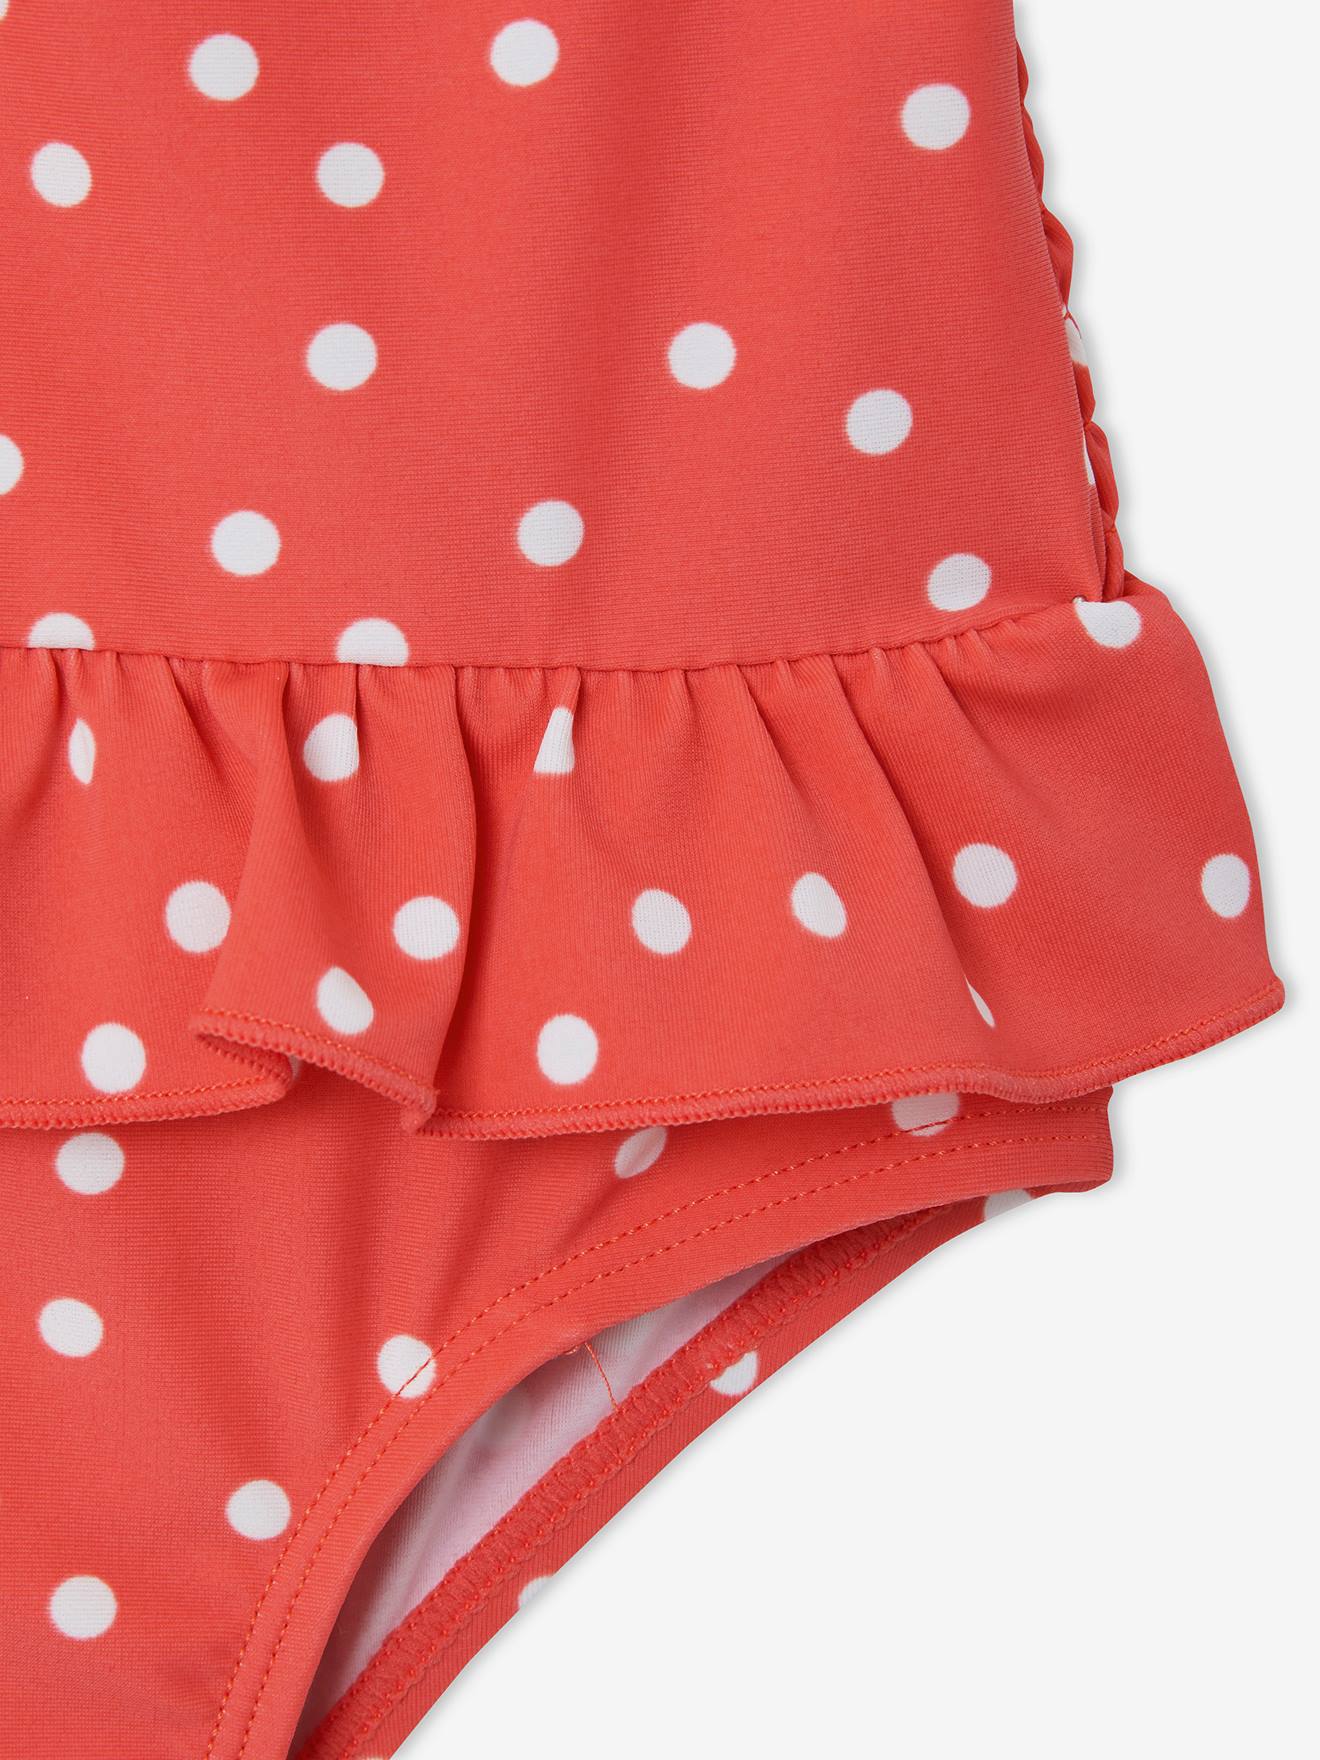 dPois Toddler Baby Girls One Piece Polka Dots Swimsuit Camisole All-Over with Ruffles Bikini Swimwear Bathing Suit 